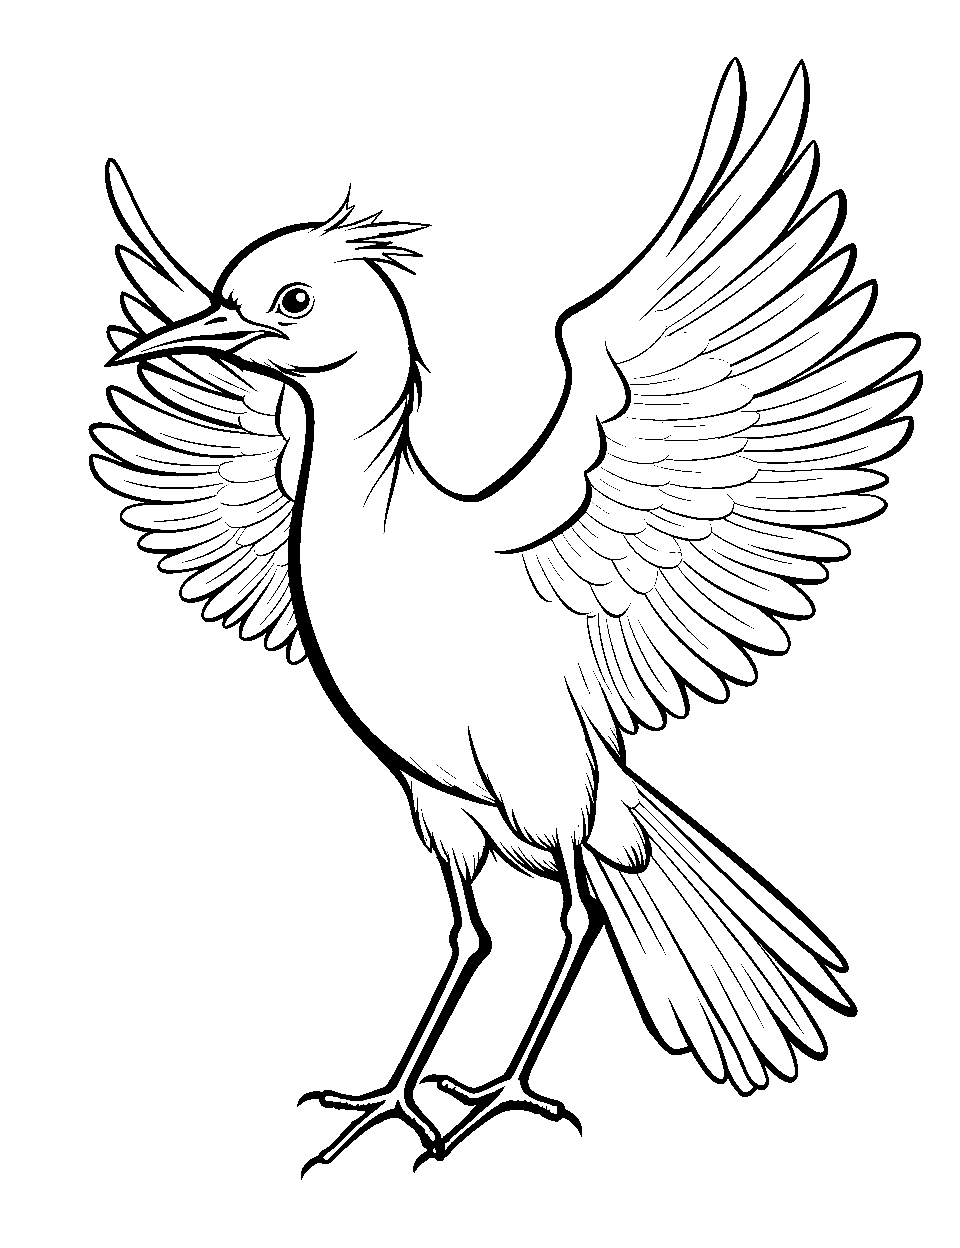 Crane's Graceful Wings Coloring Page - A crane spreading its wings wide in a graceful pose.